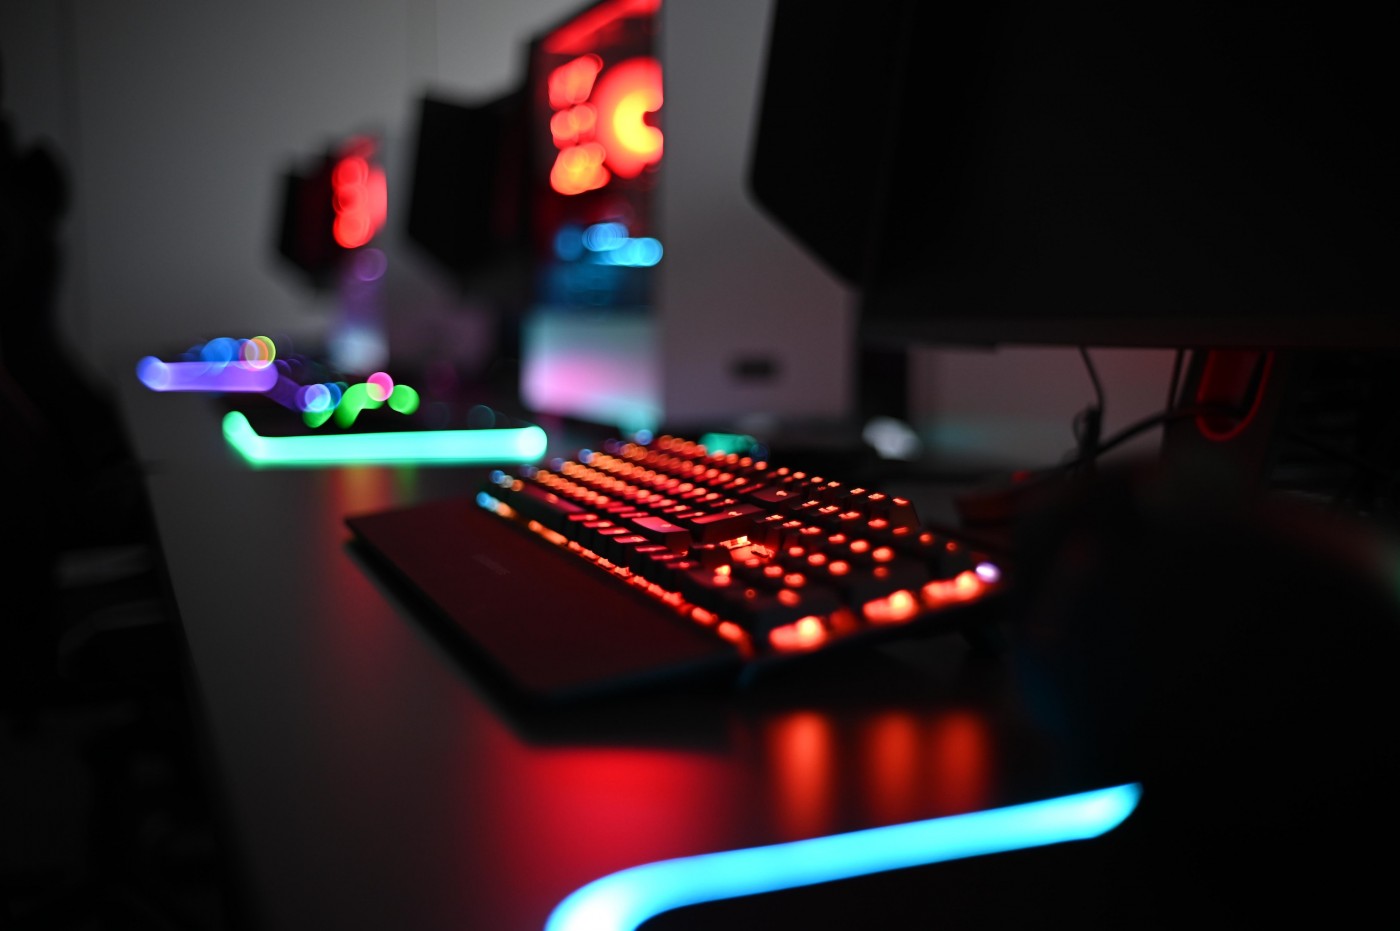 Computer keyboards with lights under the keys